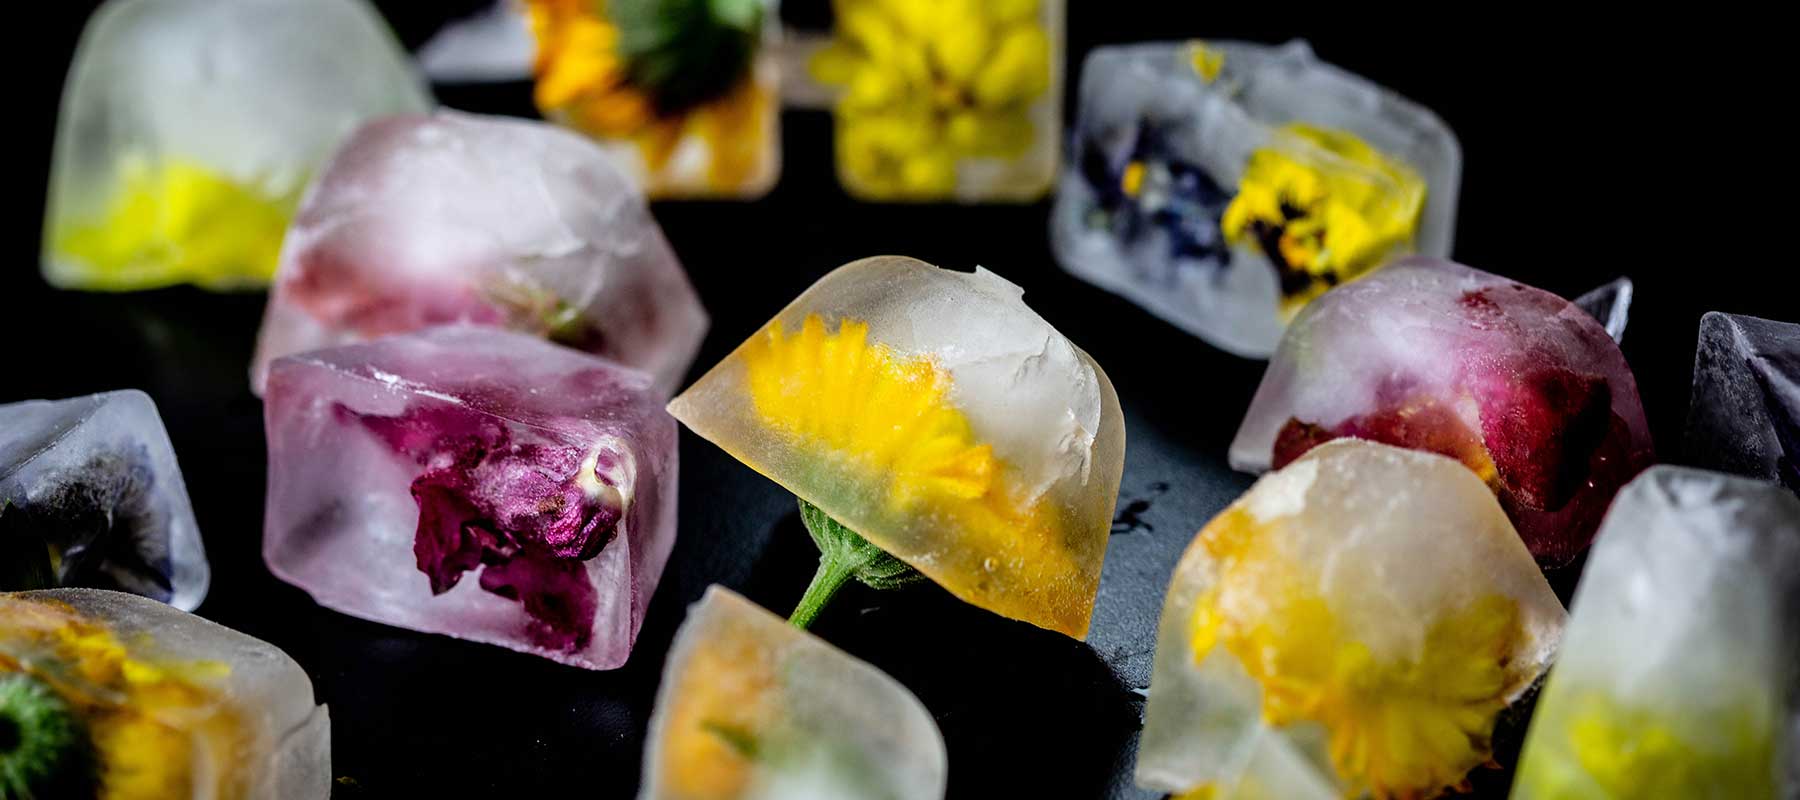 10 Edible Flowers that Will Brighten Up Your Dishes